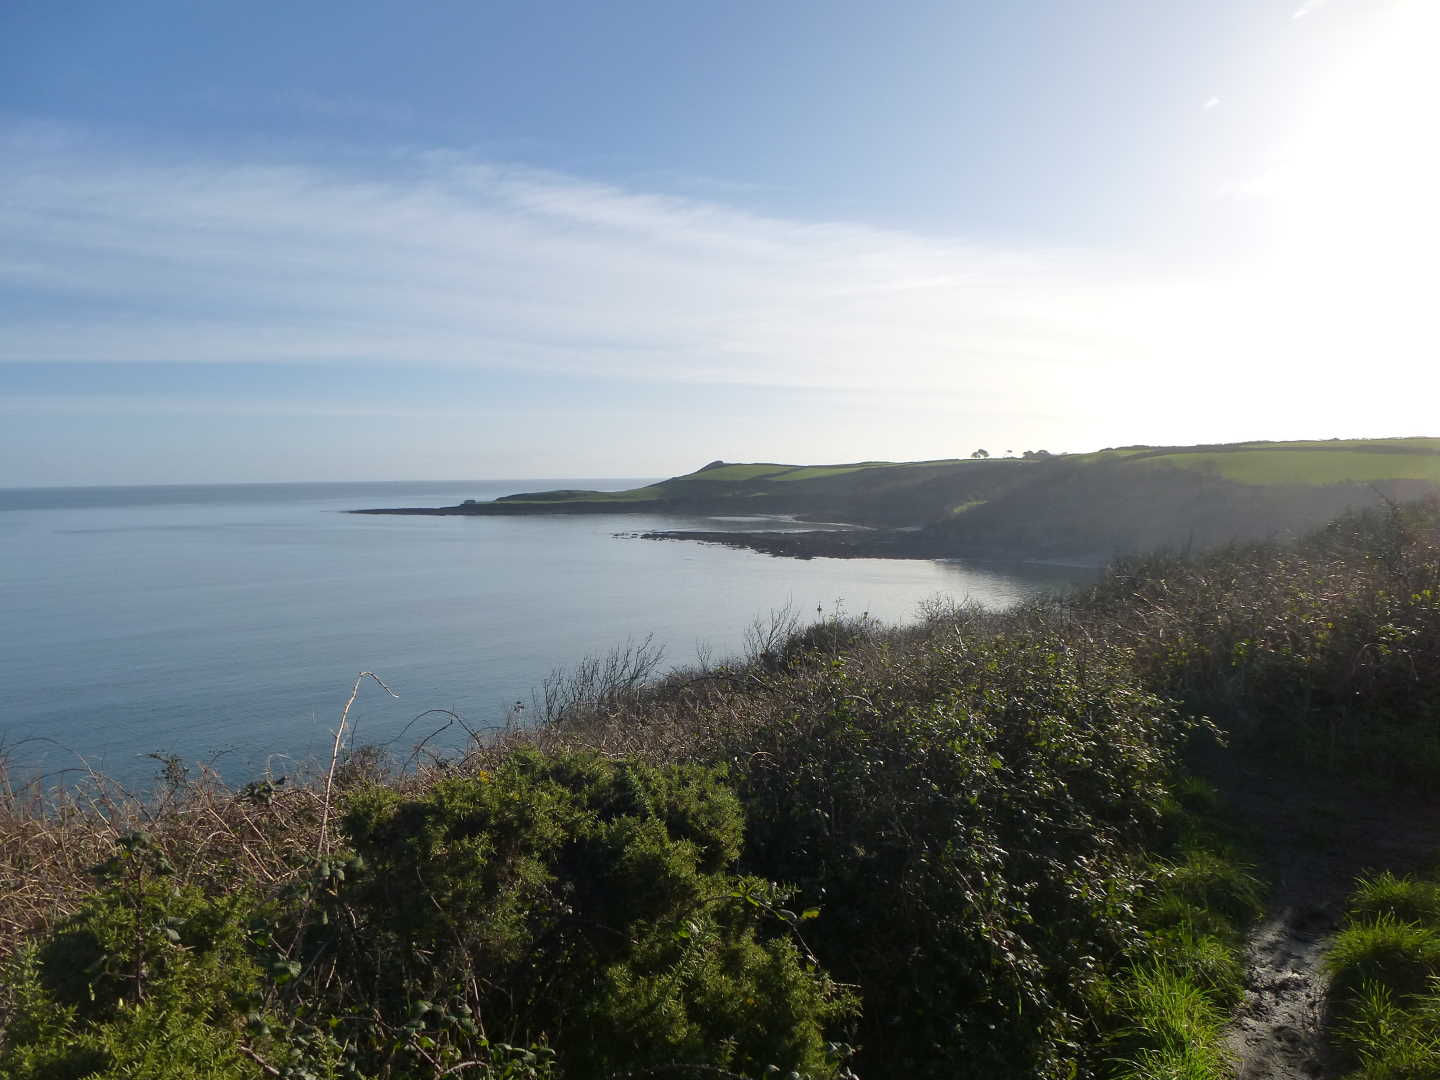 A view of the headland with the sea in the distance